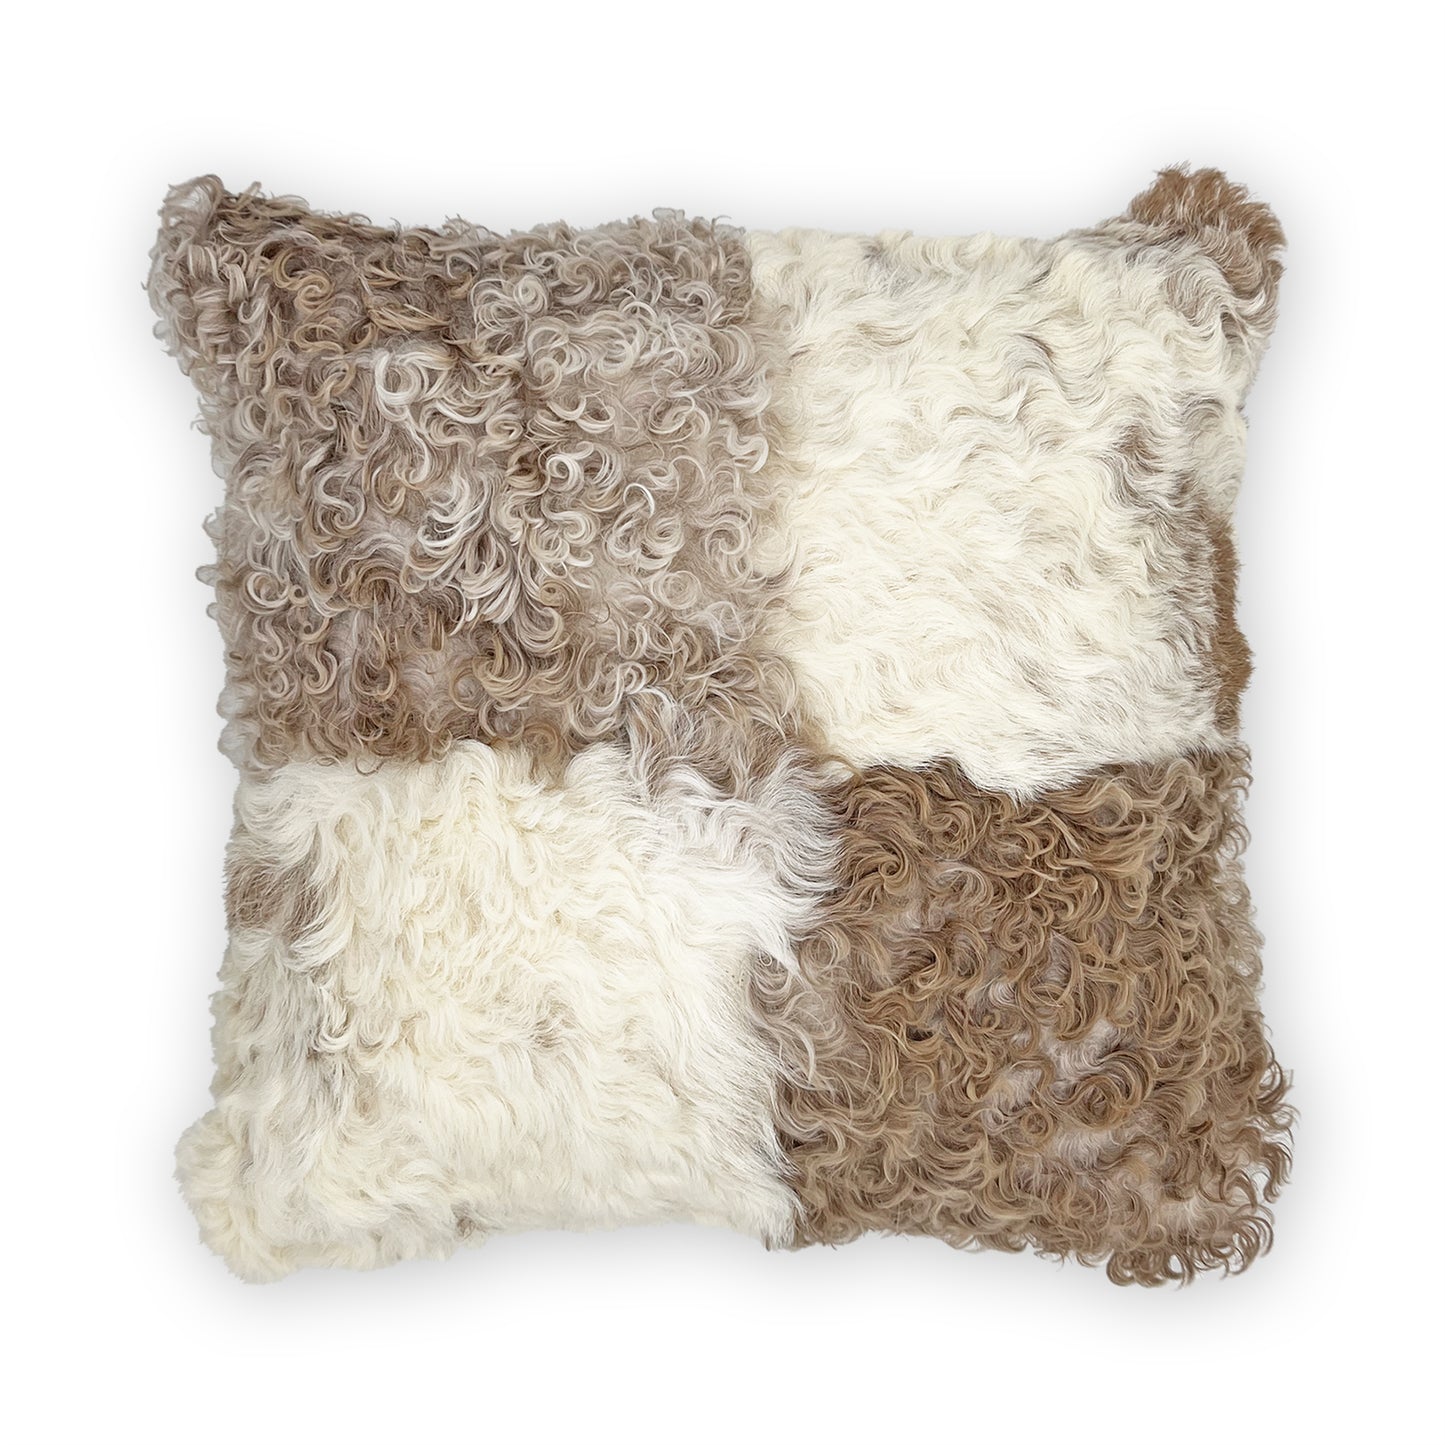 The Mood Tigrado Spanish Lambskin Patchwork Pillow, 18x18 in., Camel/Ivory